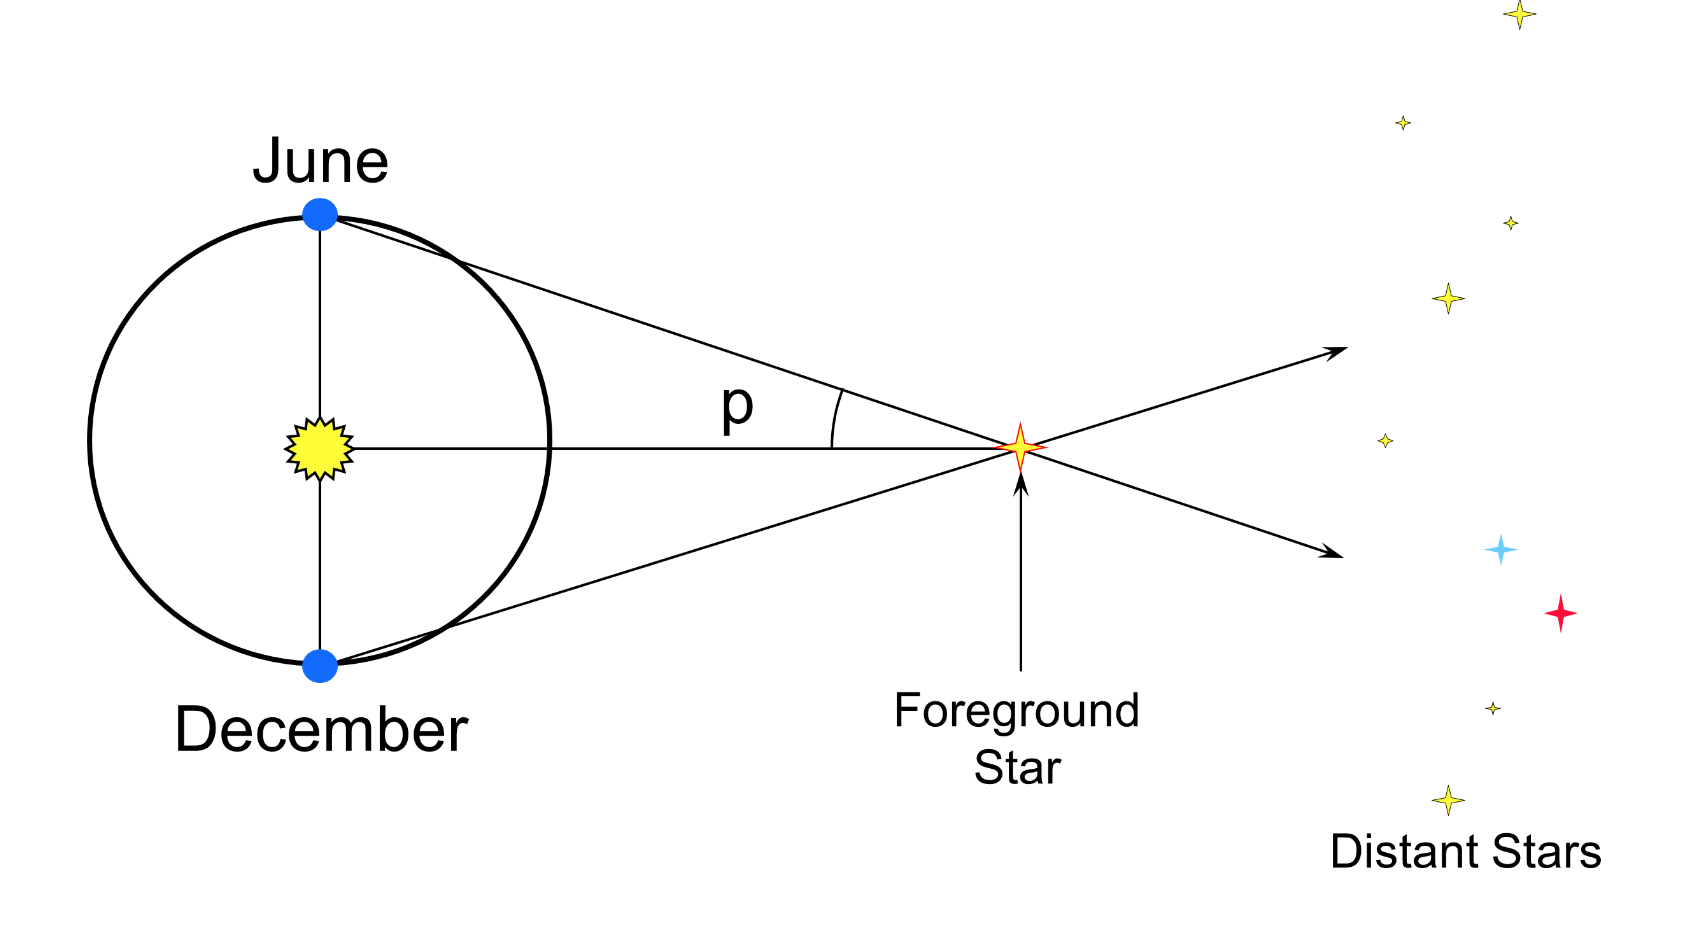 <ul><li><p>The apparent movement of a nearby star against the distant background stars as the  earth moves around the sun</p></li><li><p>p is the parallax angle</p></li></ul>